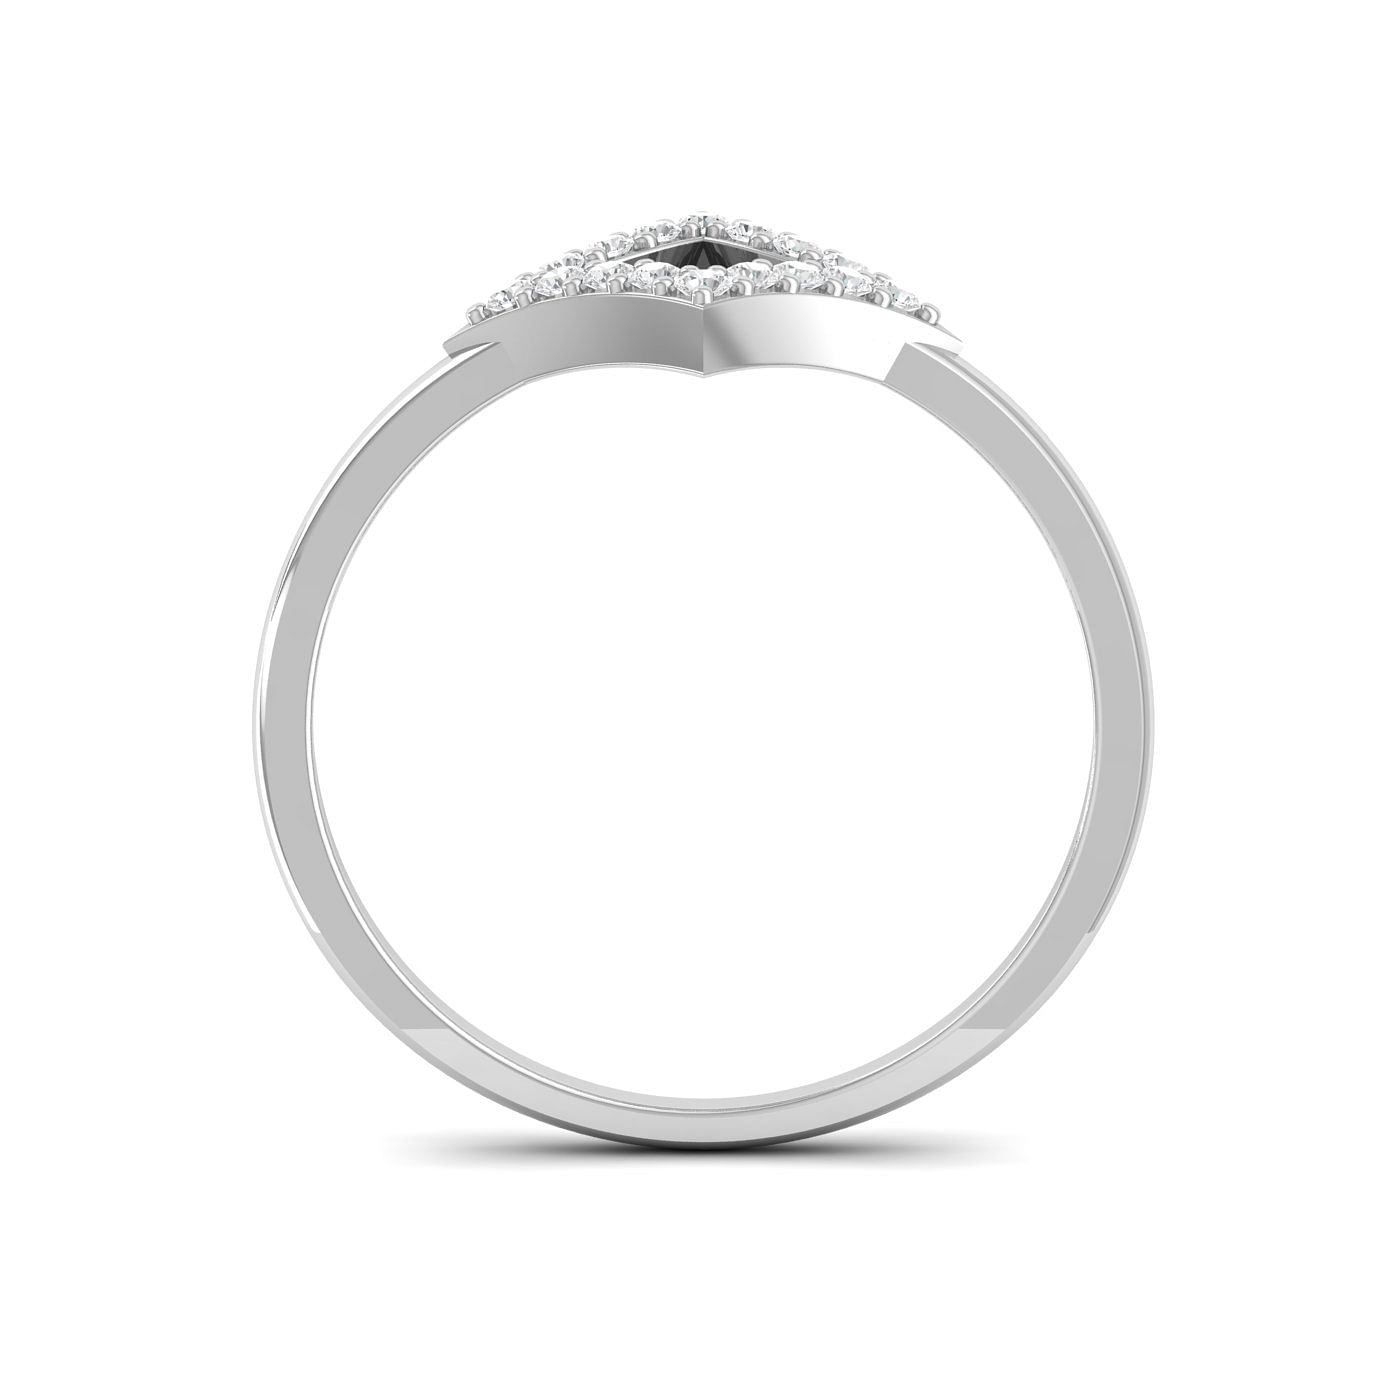 Cerf-Volant Diamond Ring Daily Wear White Gold Ring